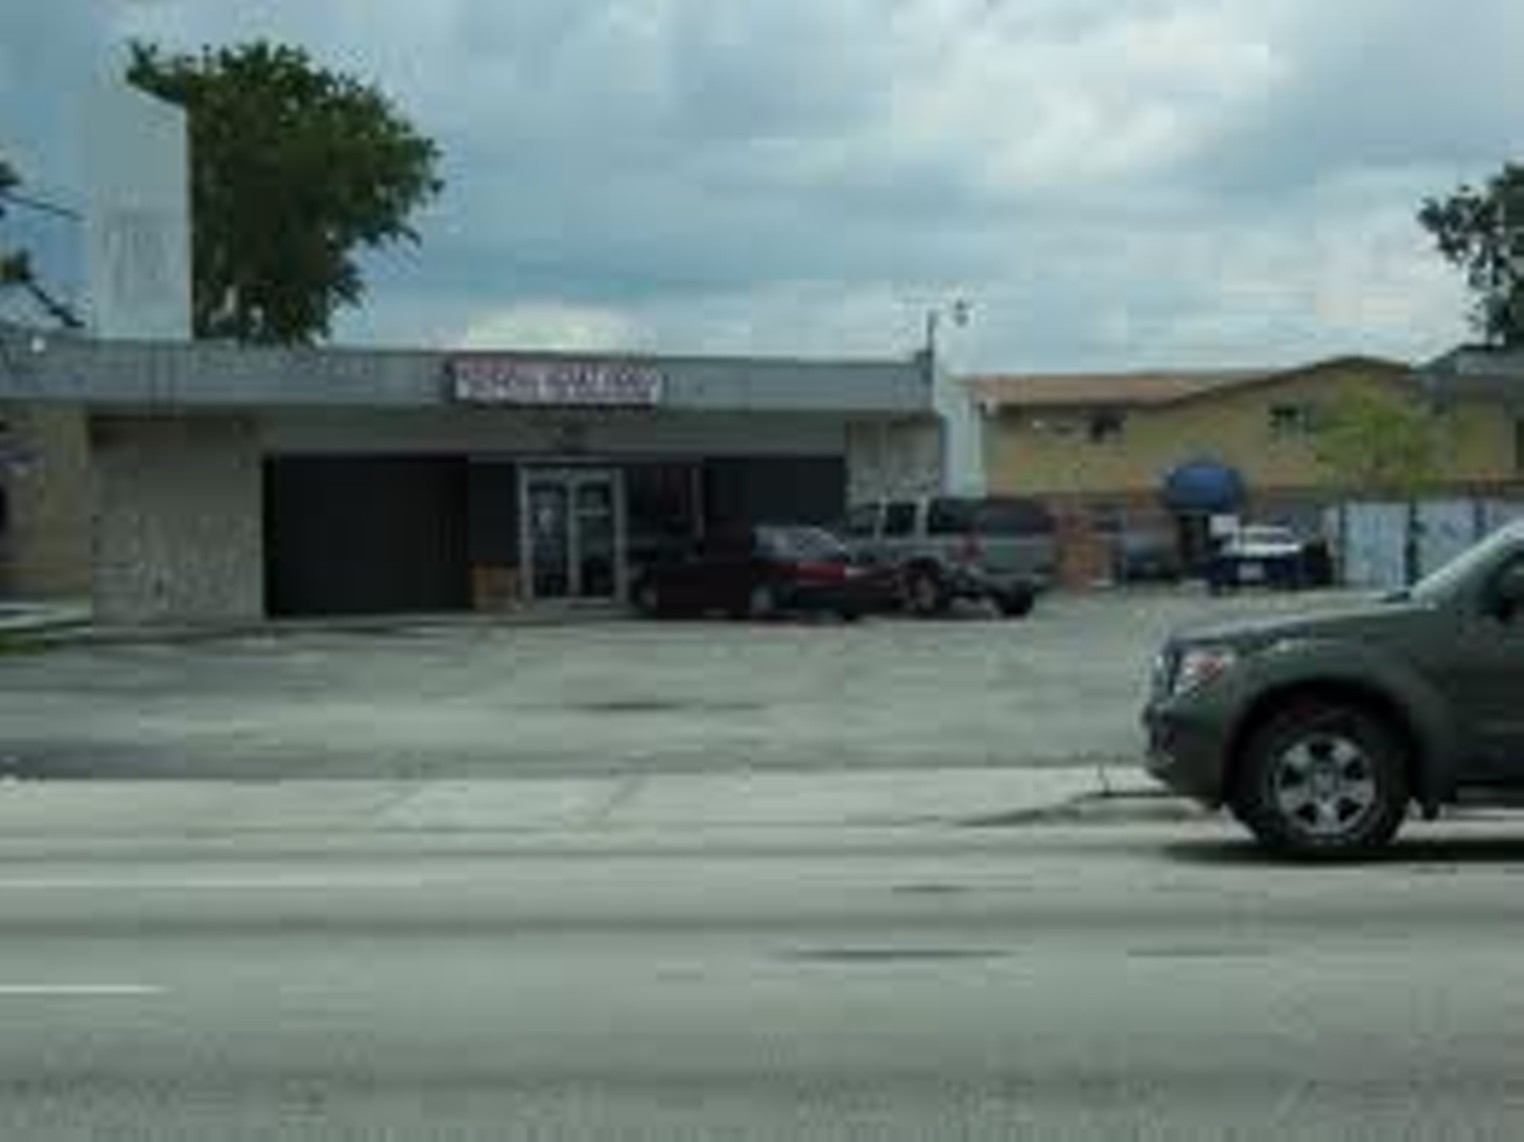 Best Adult Video Store 2008 Kendall Adult Video Best Restaurants, Bars, Clubs, Music and Stores in Miami Miami New Times pic